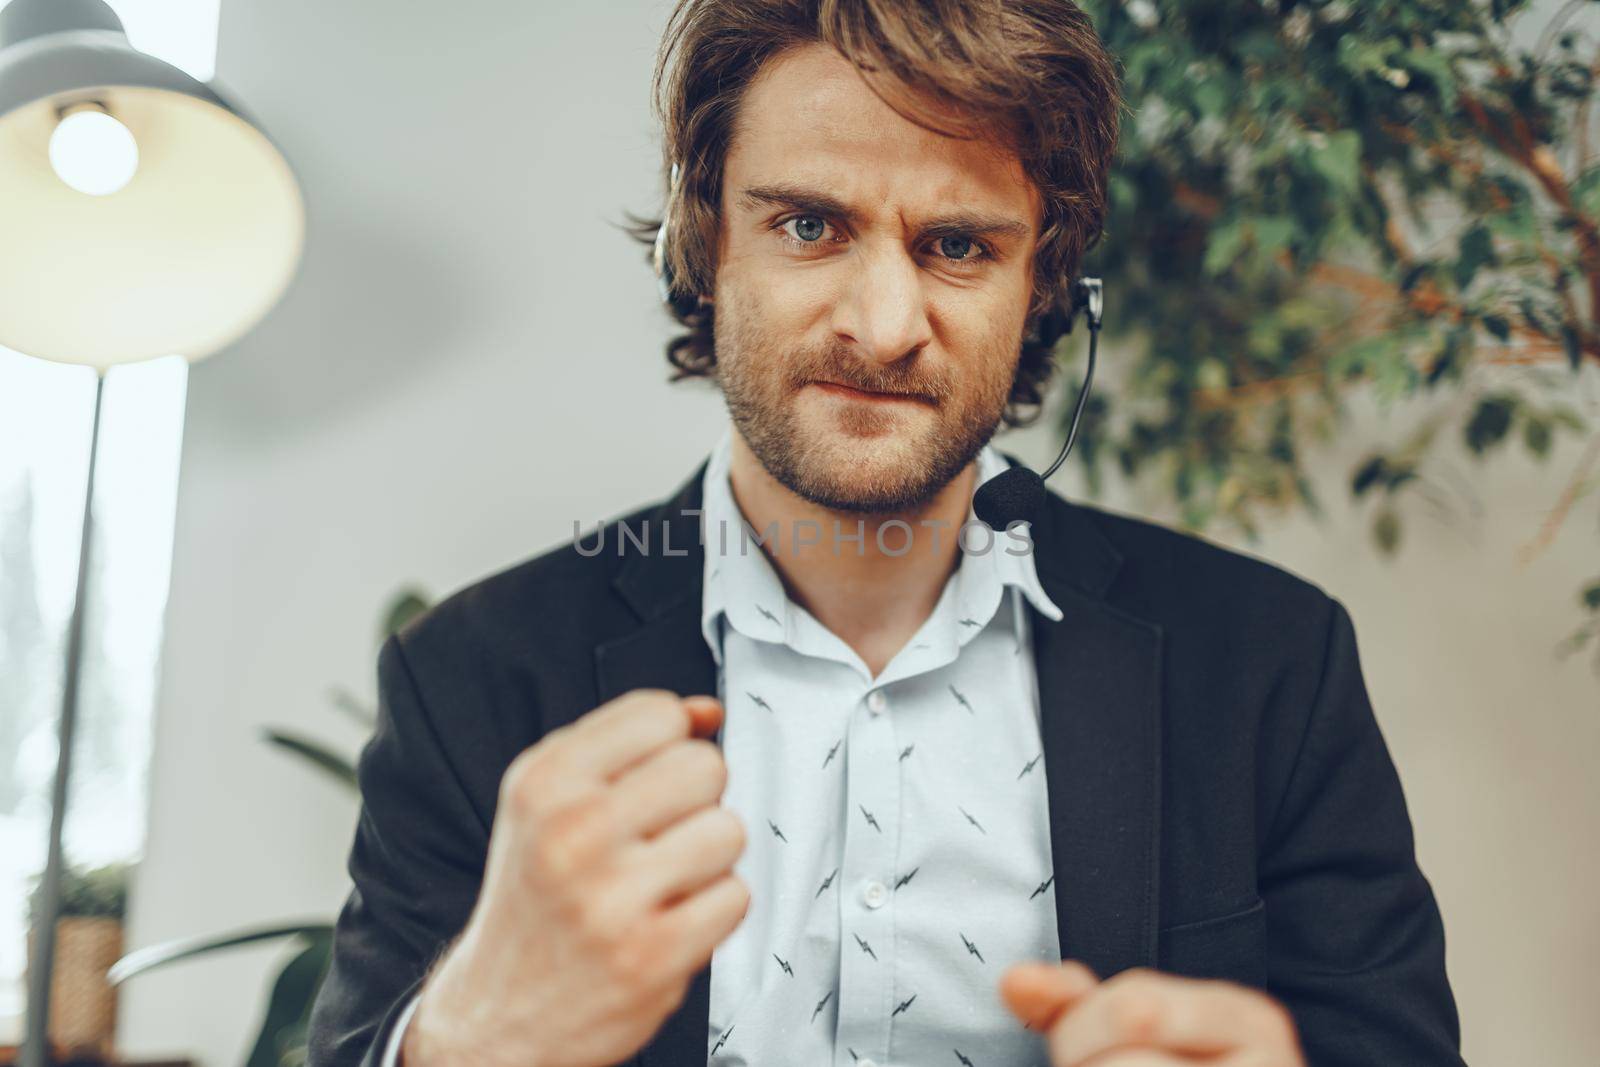 Close up portrait of an angry businessman with headset having stressful online conversation by Fabrikasimf